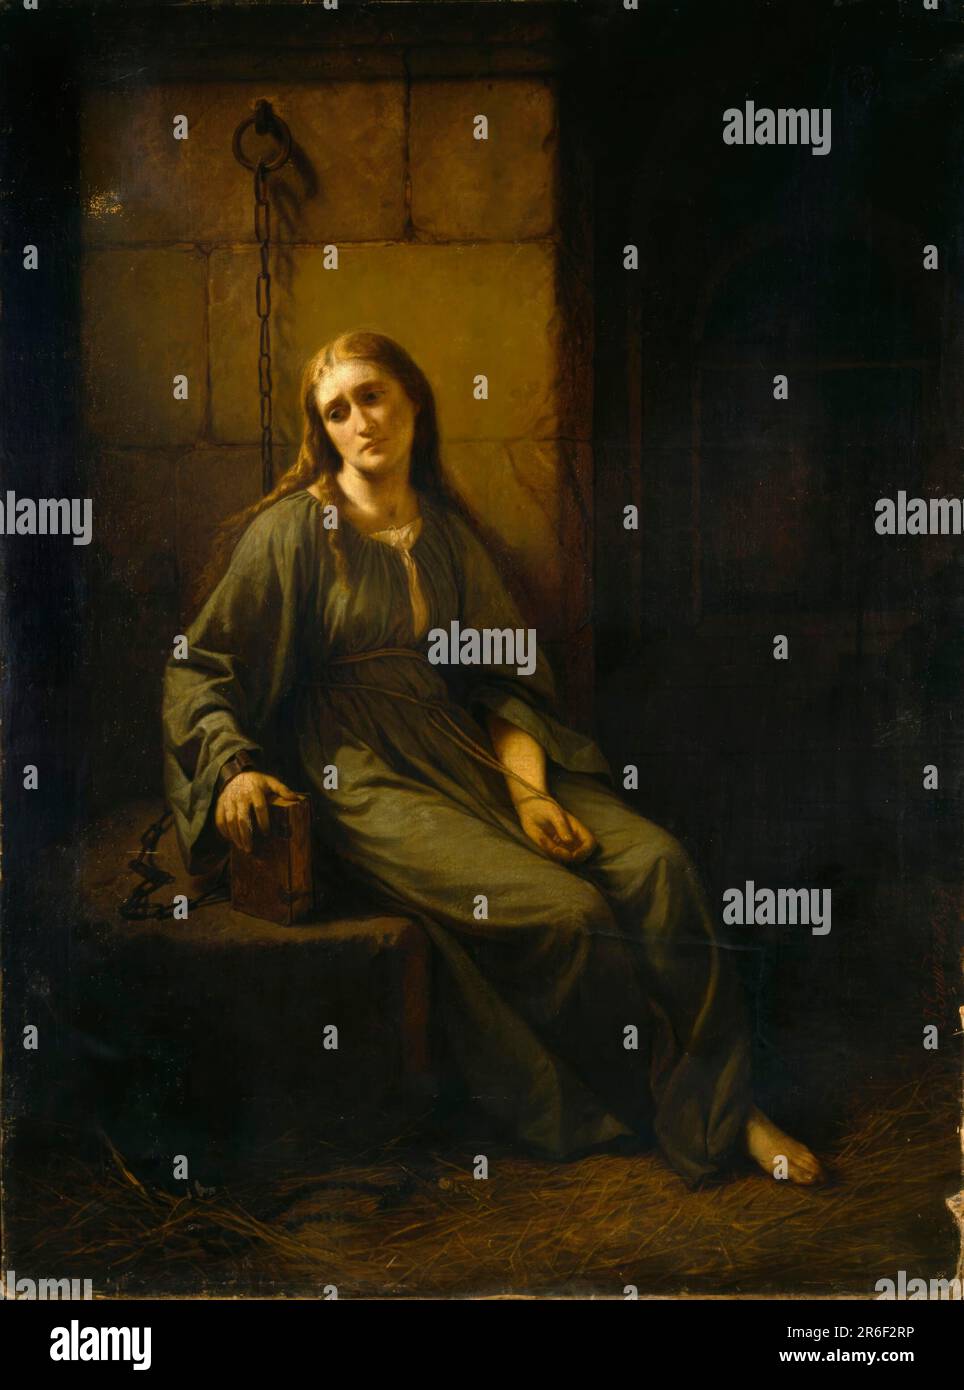 Marguerite in Prison. oil on canvas. Date: 1863-1867. Museum: Smithsonian American Art Museum. Stock Photo